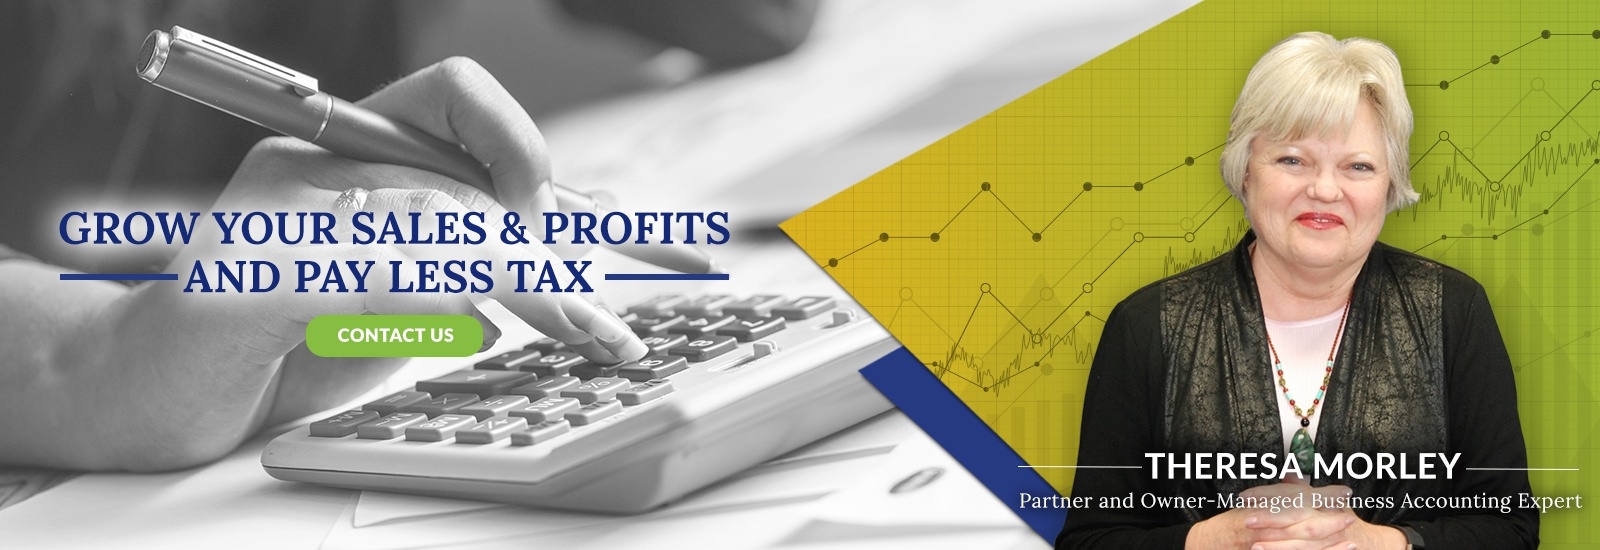 Grow Your Sales and Profits and Pay Less Tax - Morley Chartered Professional Accountant